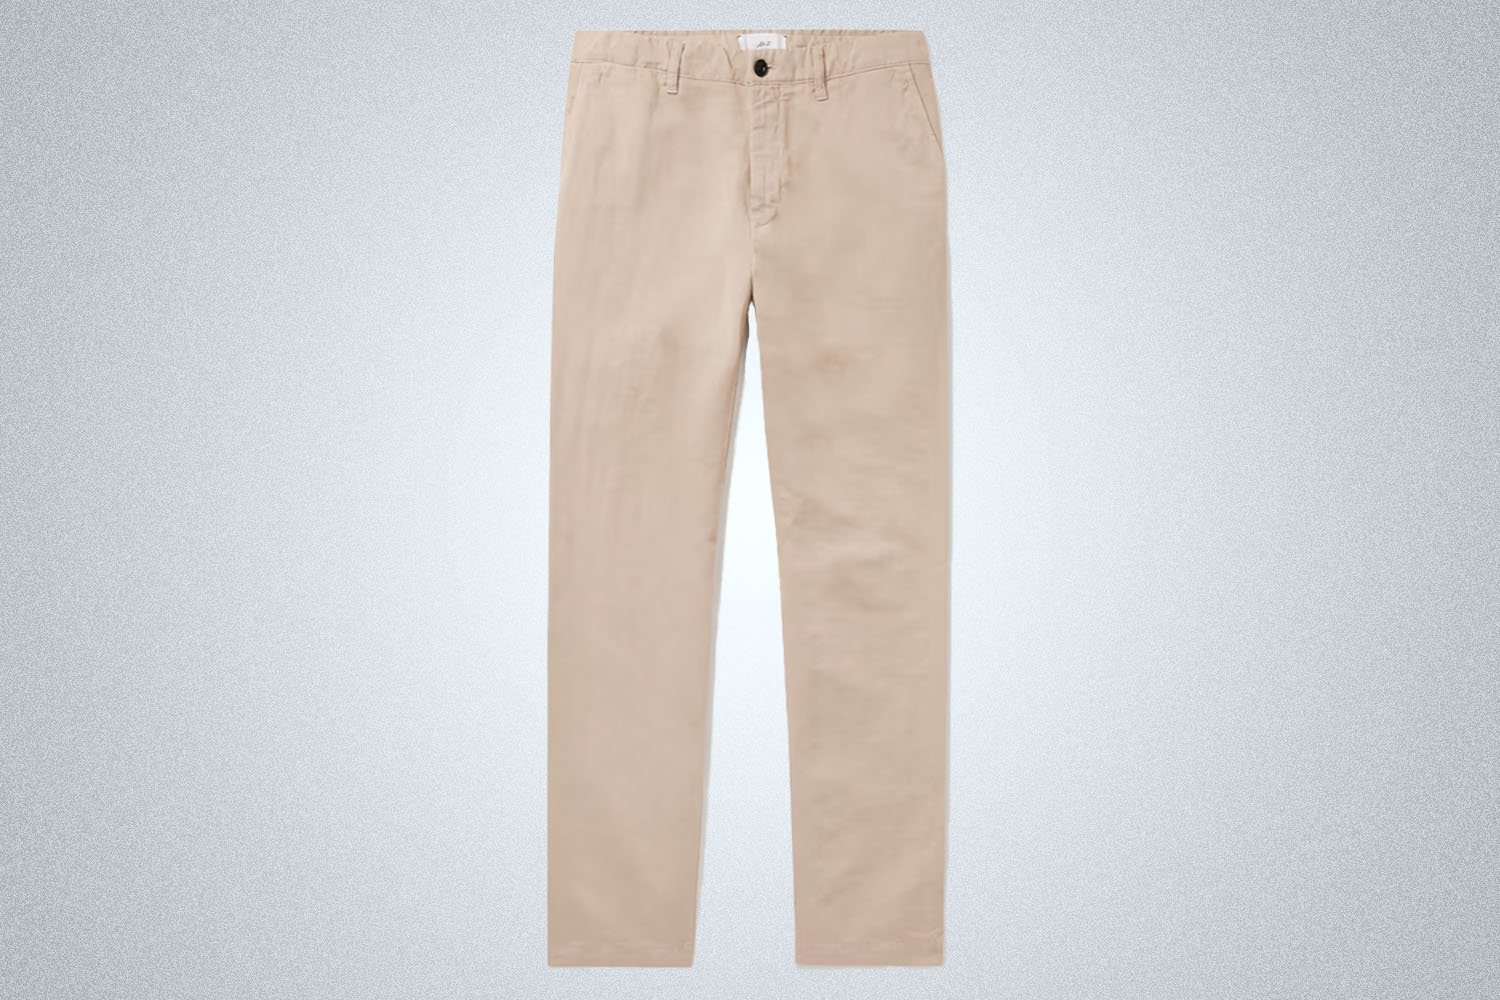 a pair of beige chinos from Mr P on a grey background